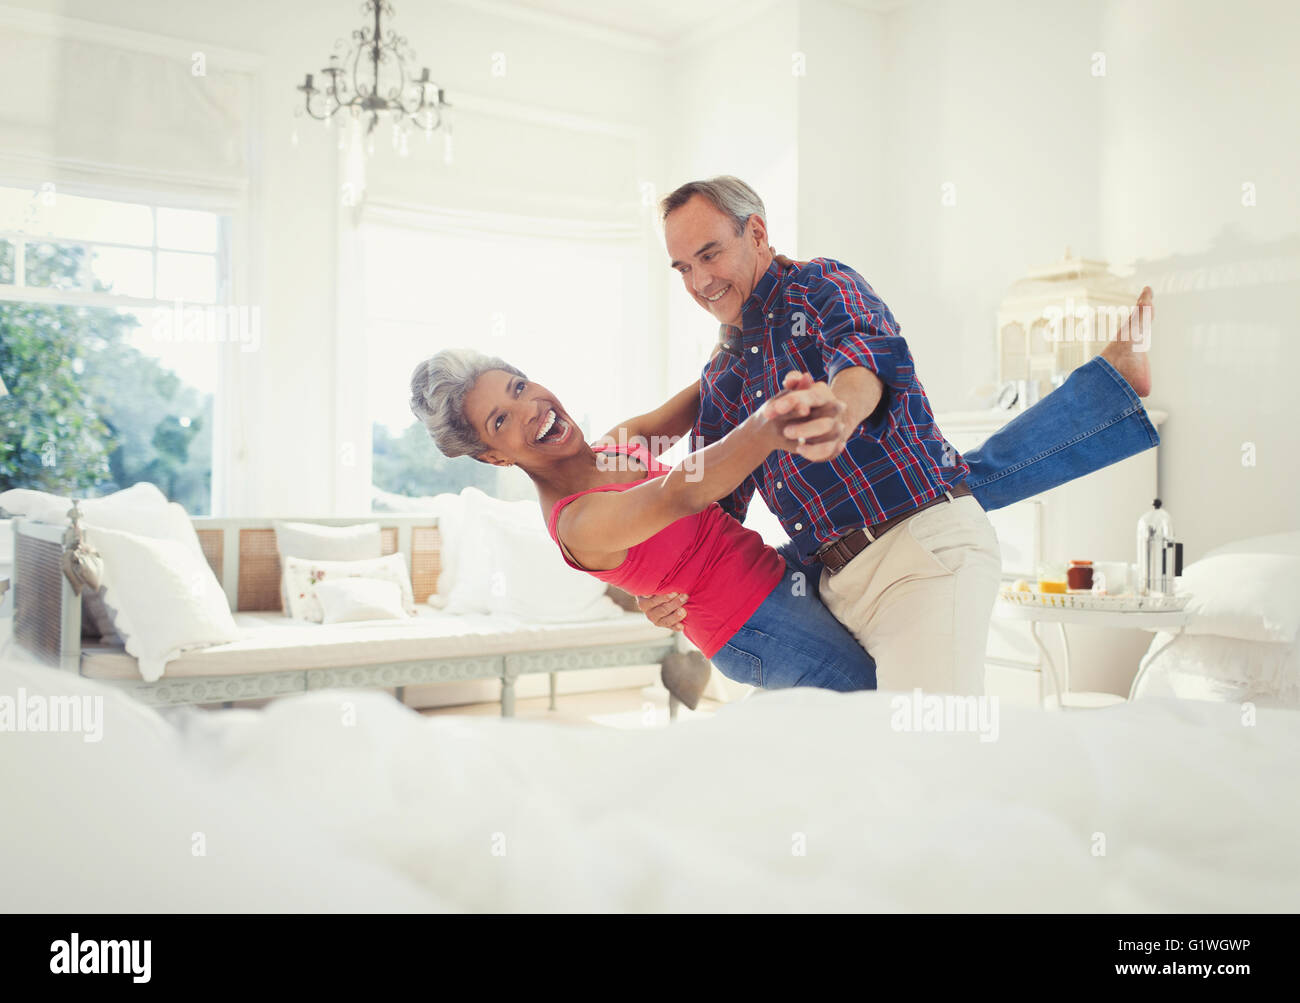 Playful mature couple dancing in living room Stock Photo